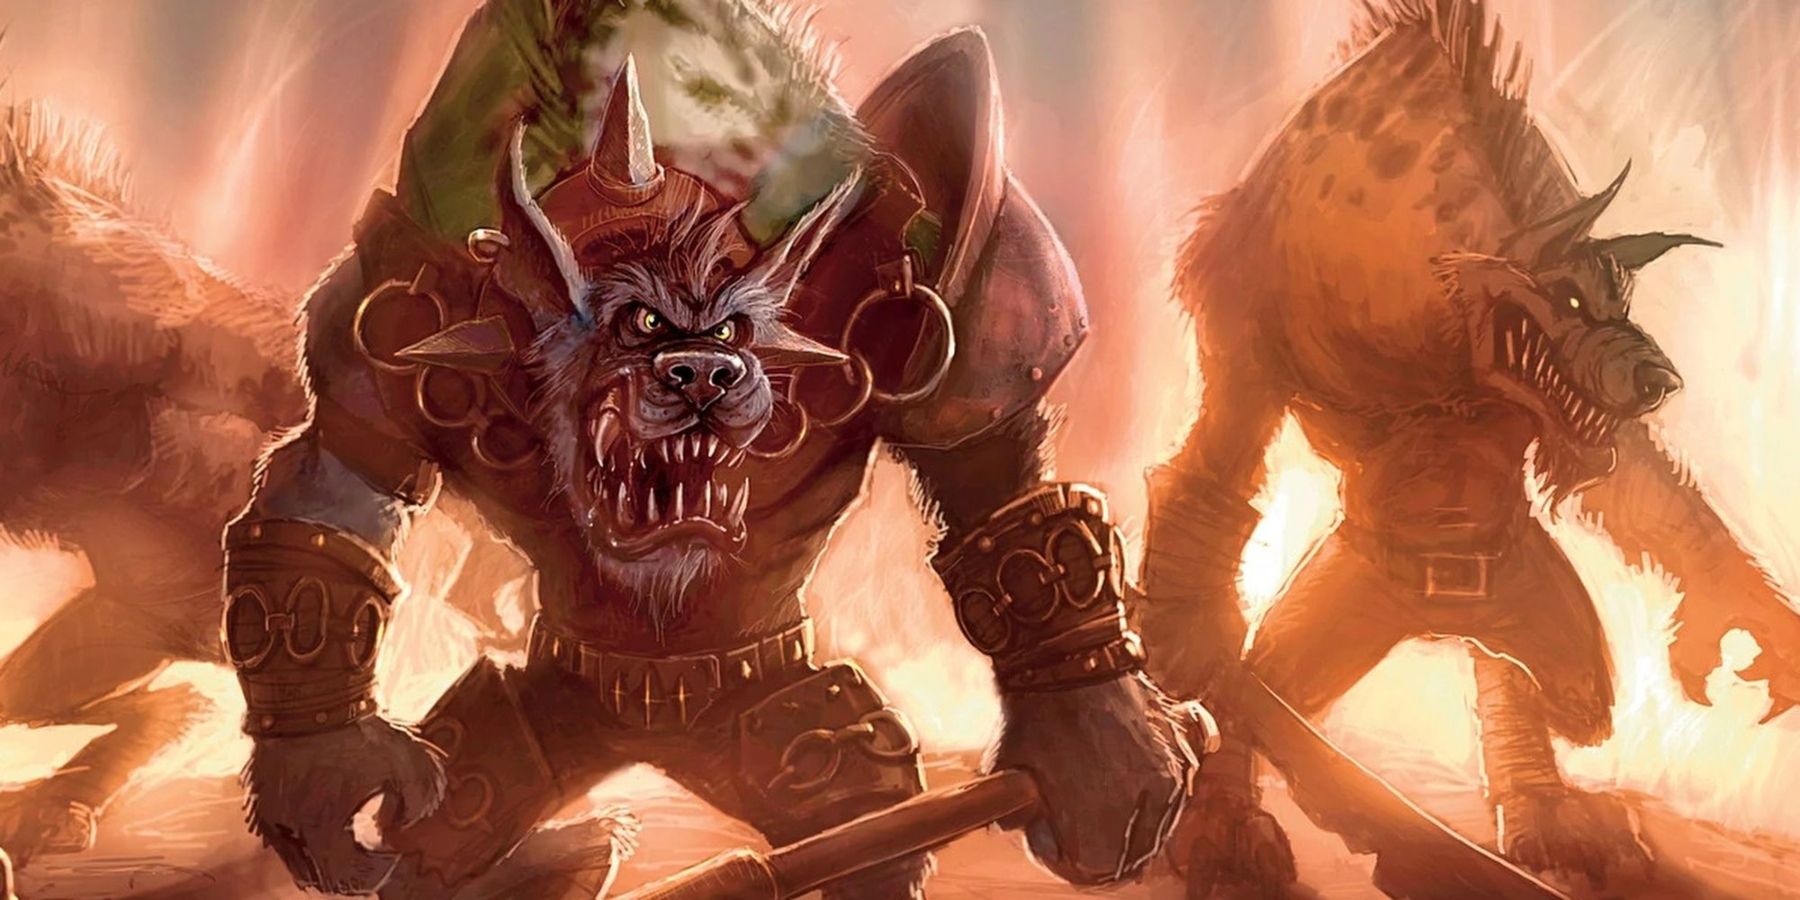 World of Warcraft's Hogger flanked by two gnoll guards